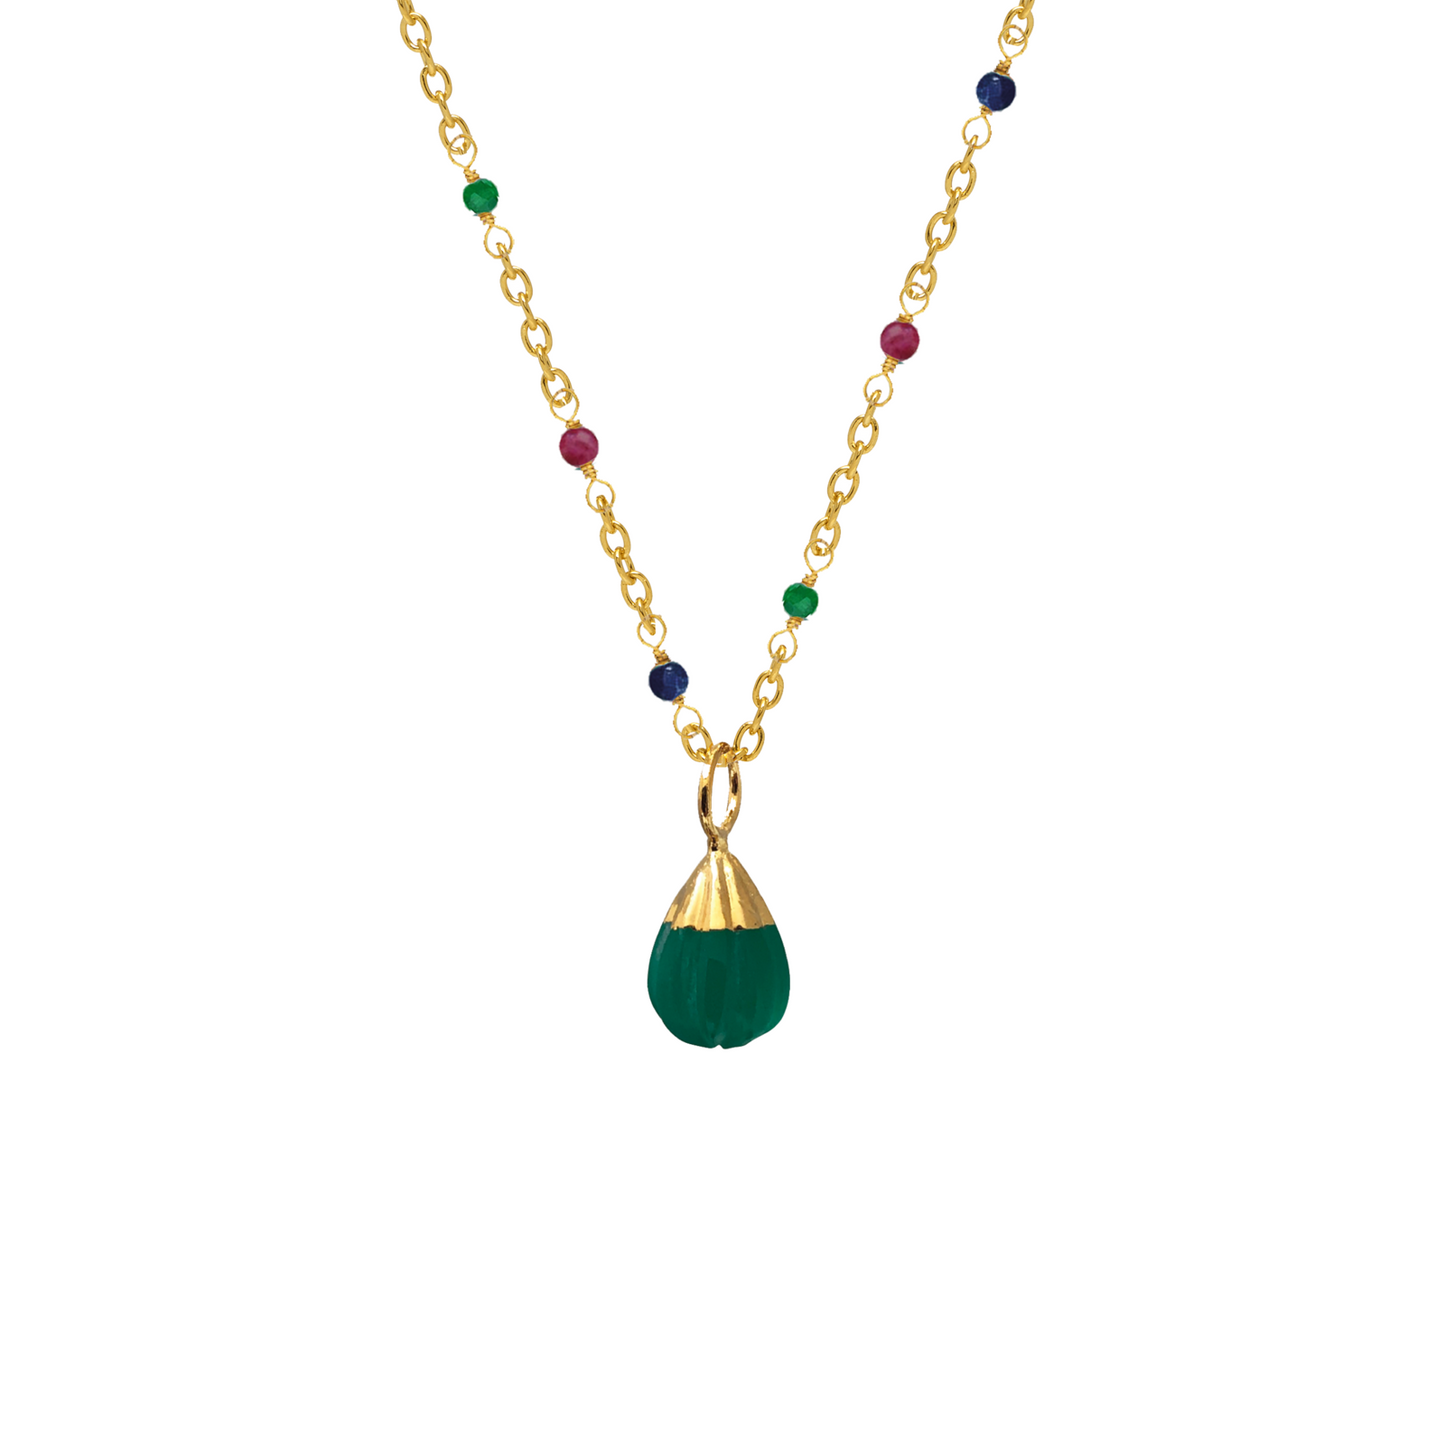 Carved Green Onyx Pendant on Gold Multi Gemstone Rosary Chain